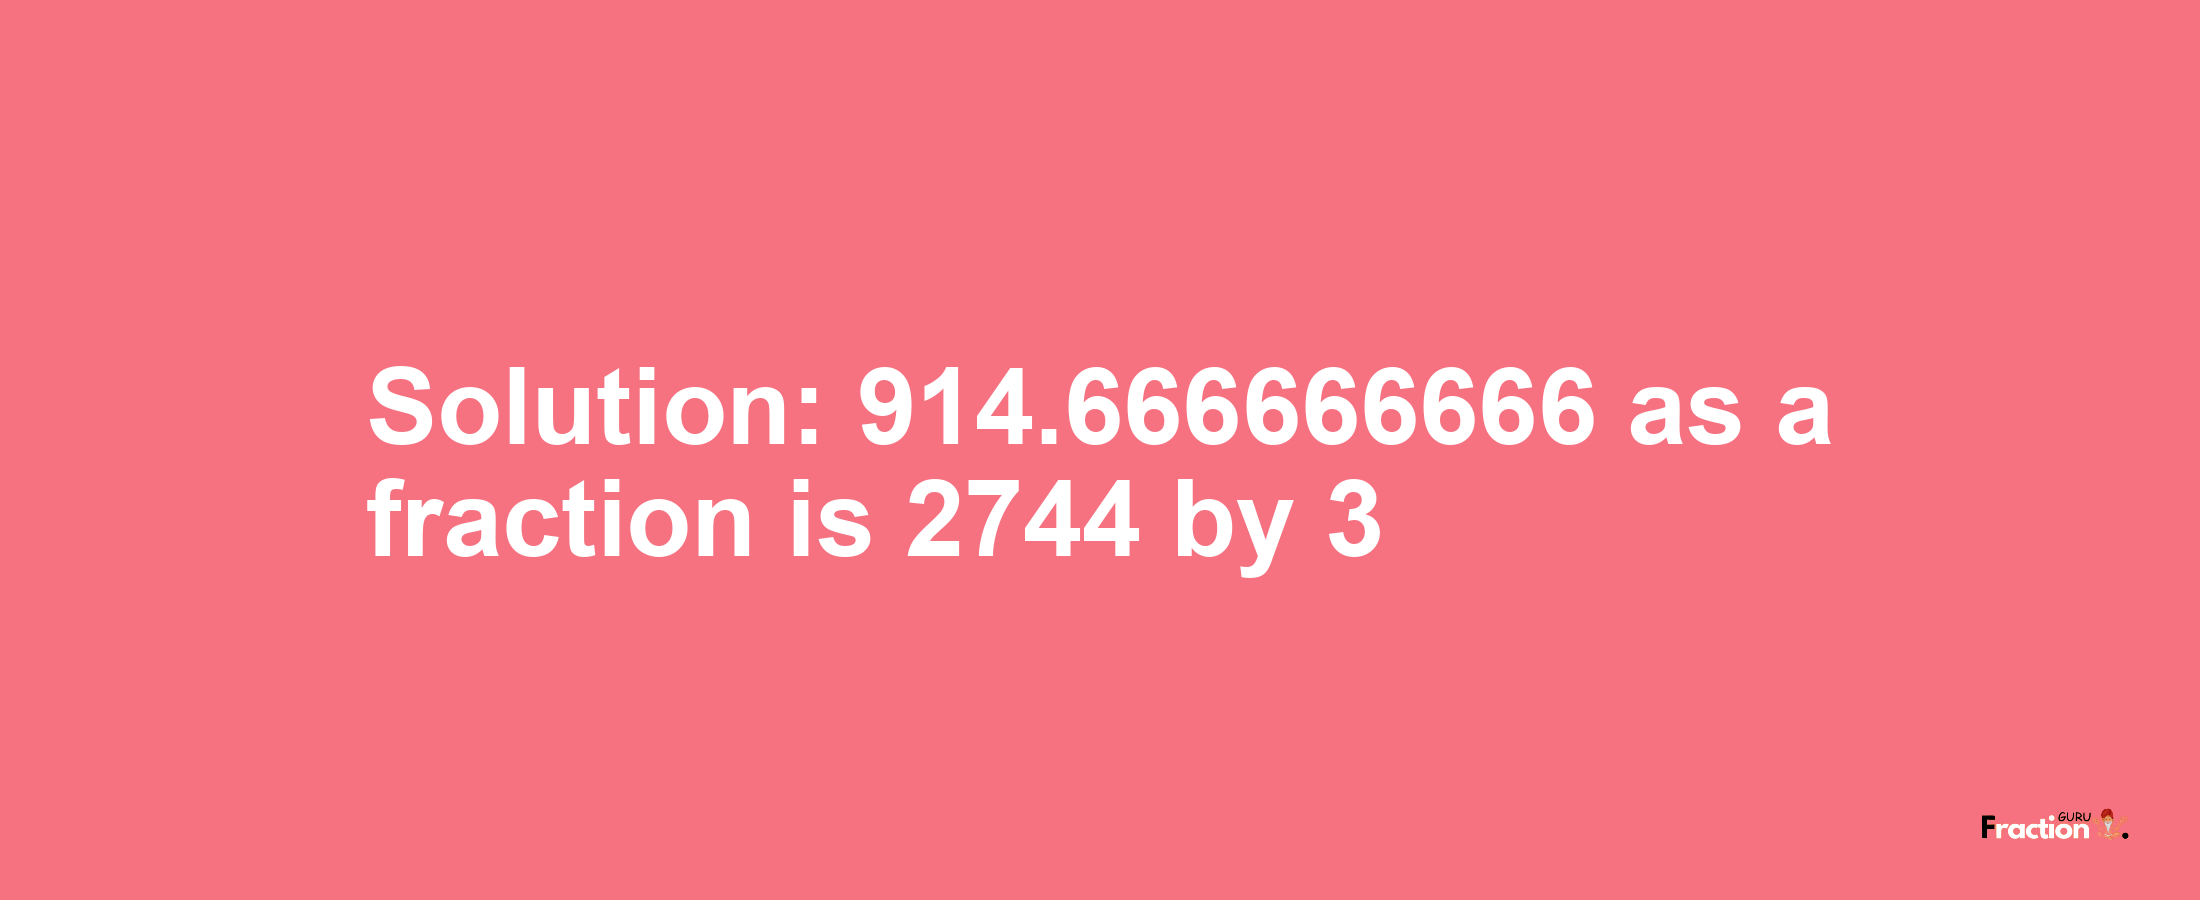 Solution:914.666666666 as a fraction is 2744/3